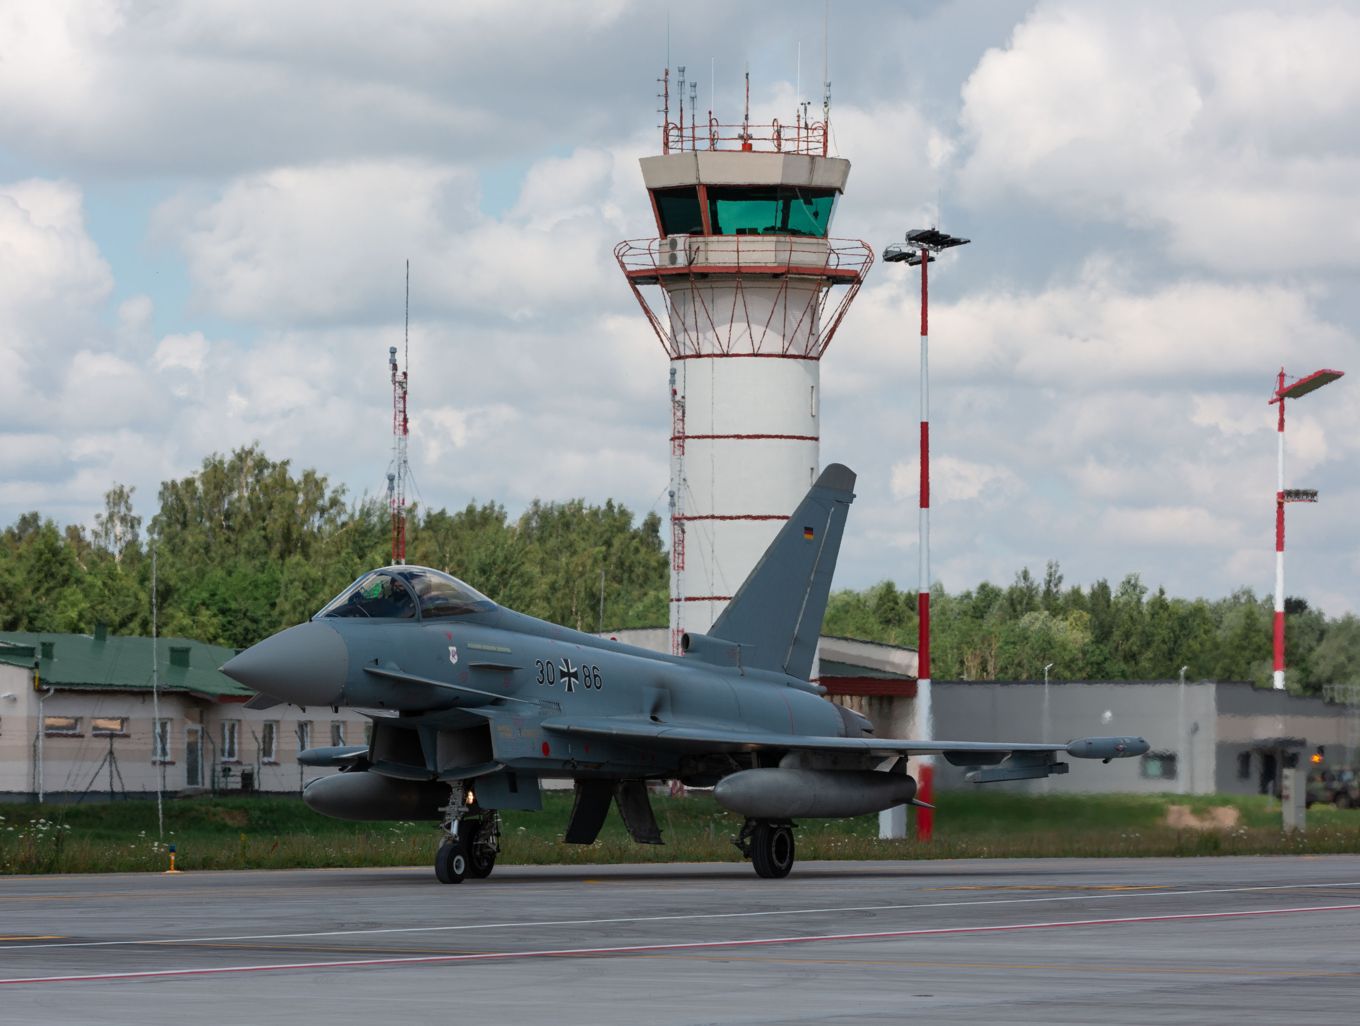 Image shows German Air Force Eurofighter taxiing on arrival with air traffic control tower in the background.